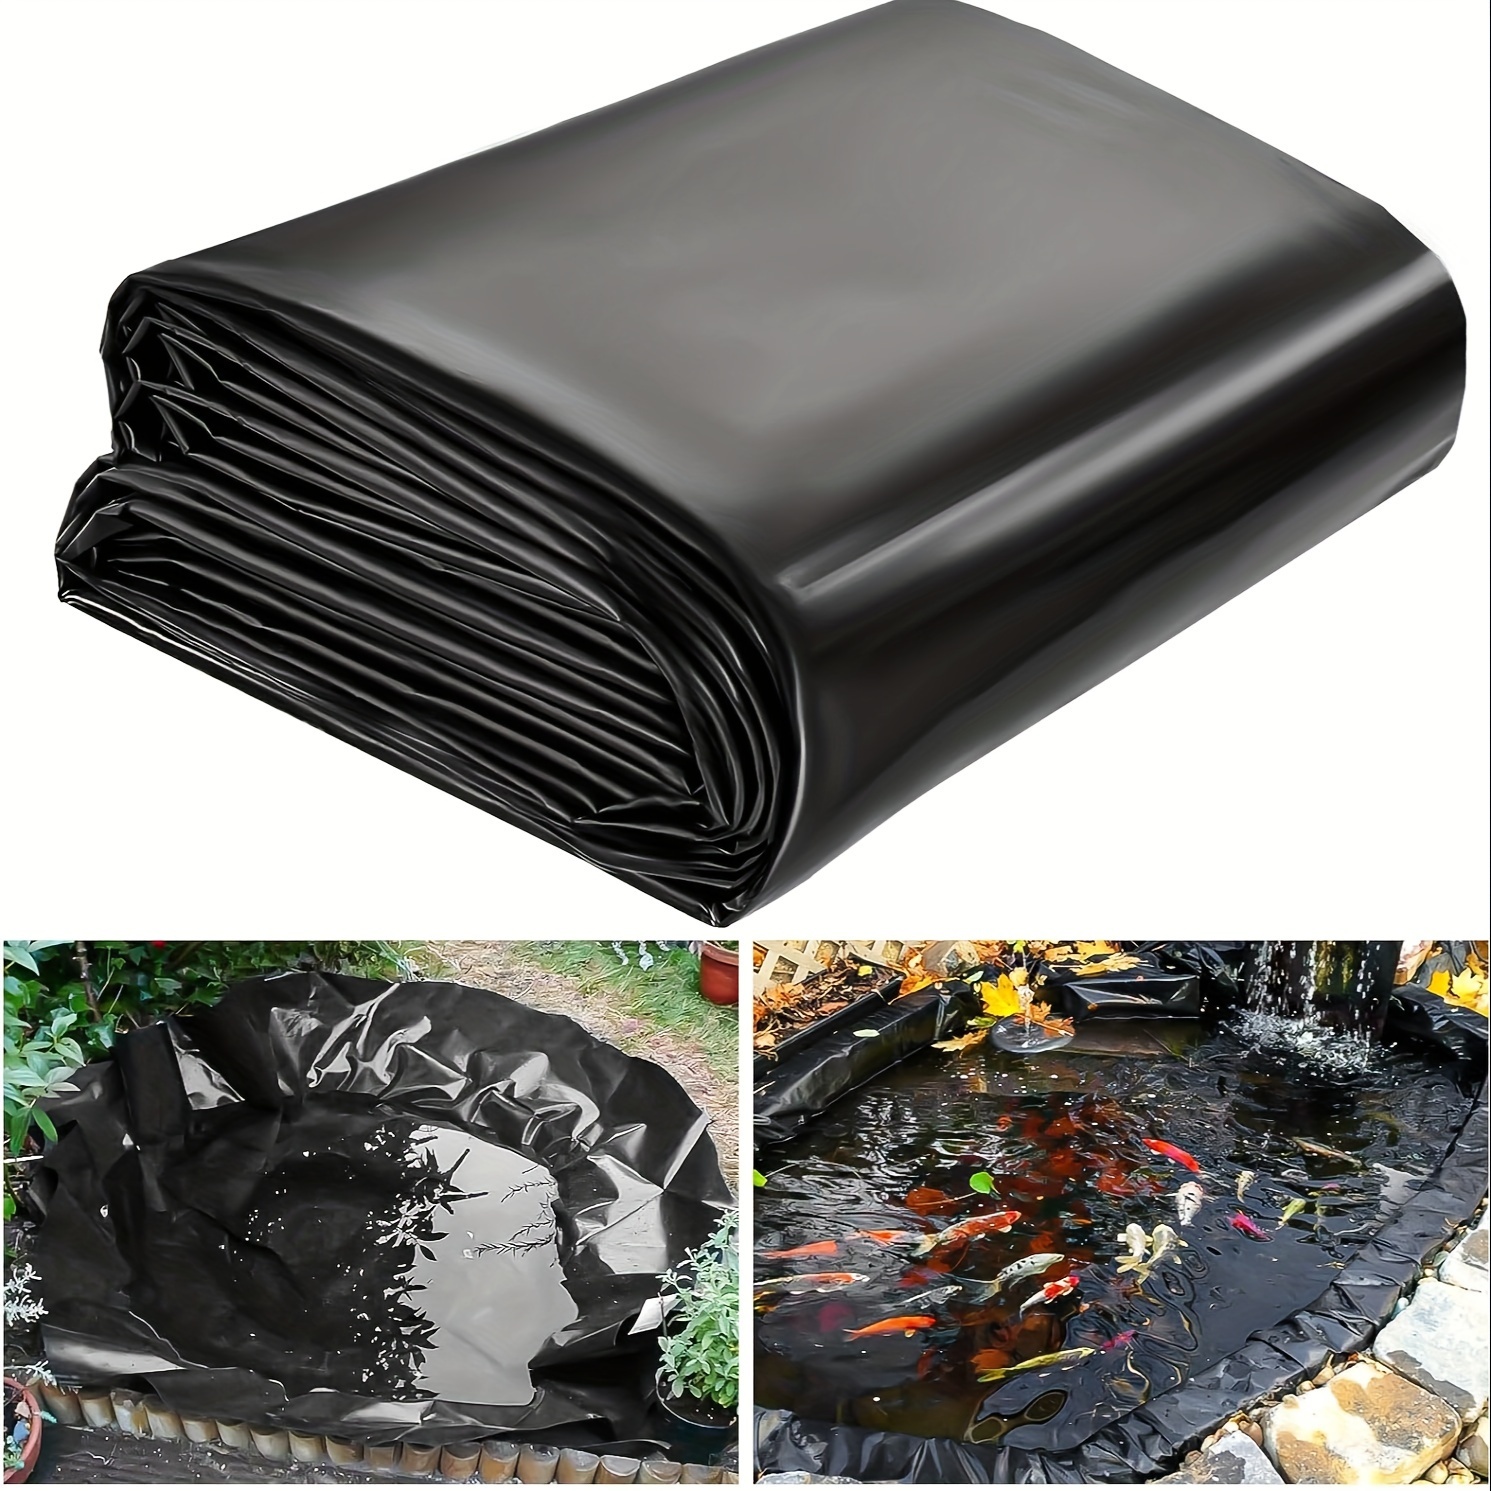 1pc pond liner thickness fish pond liners for outdoor ponds pond skins for waterfall fish or koi pond streams fountains